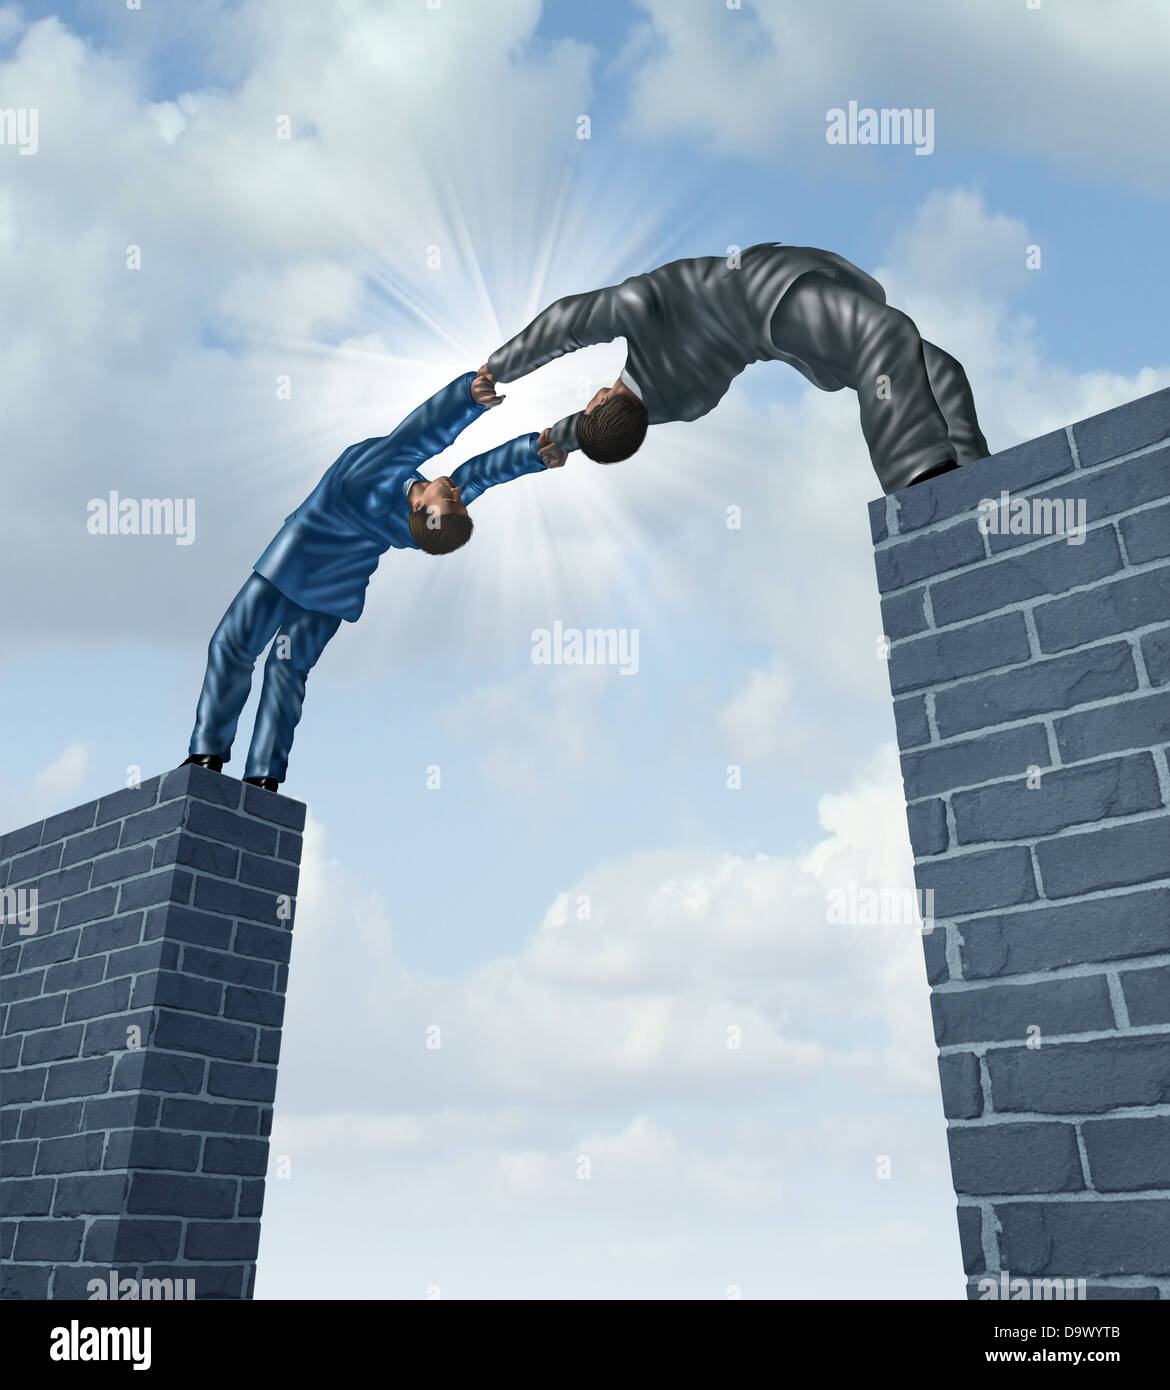 Building a bridge with a business team of two businessmen working together in a strong support partnership bridging the gap to connect in a successful solution to financial challenges. Stock Photo